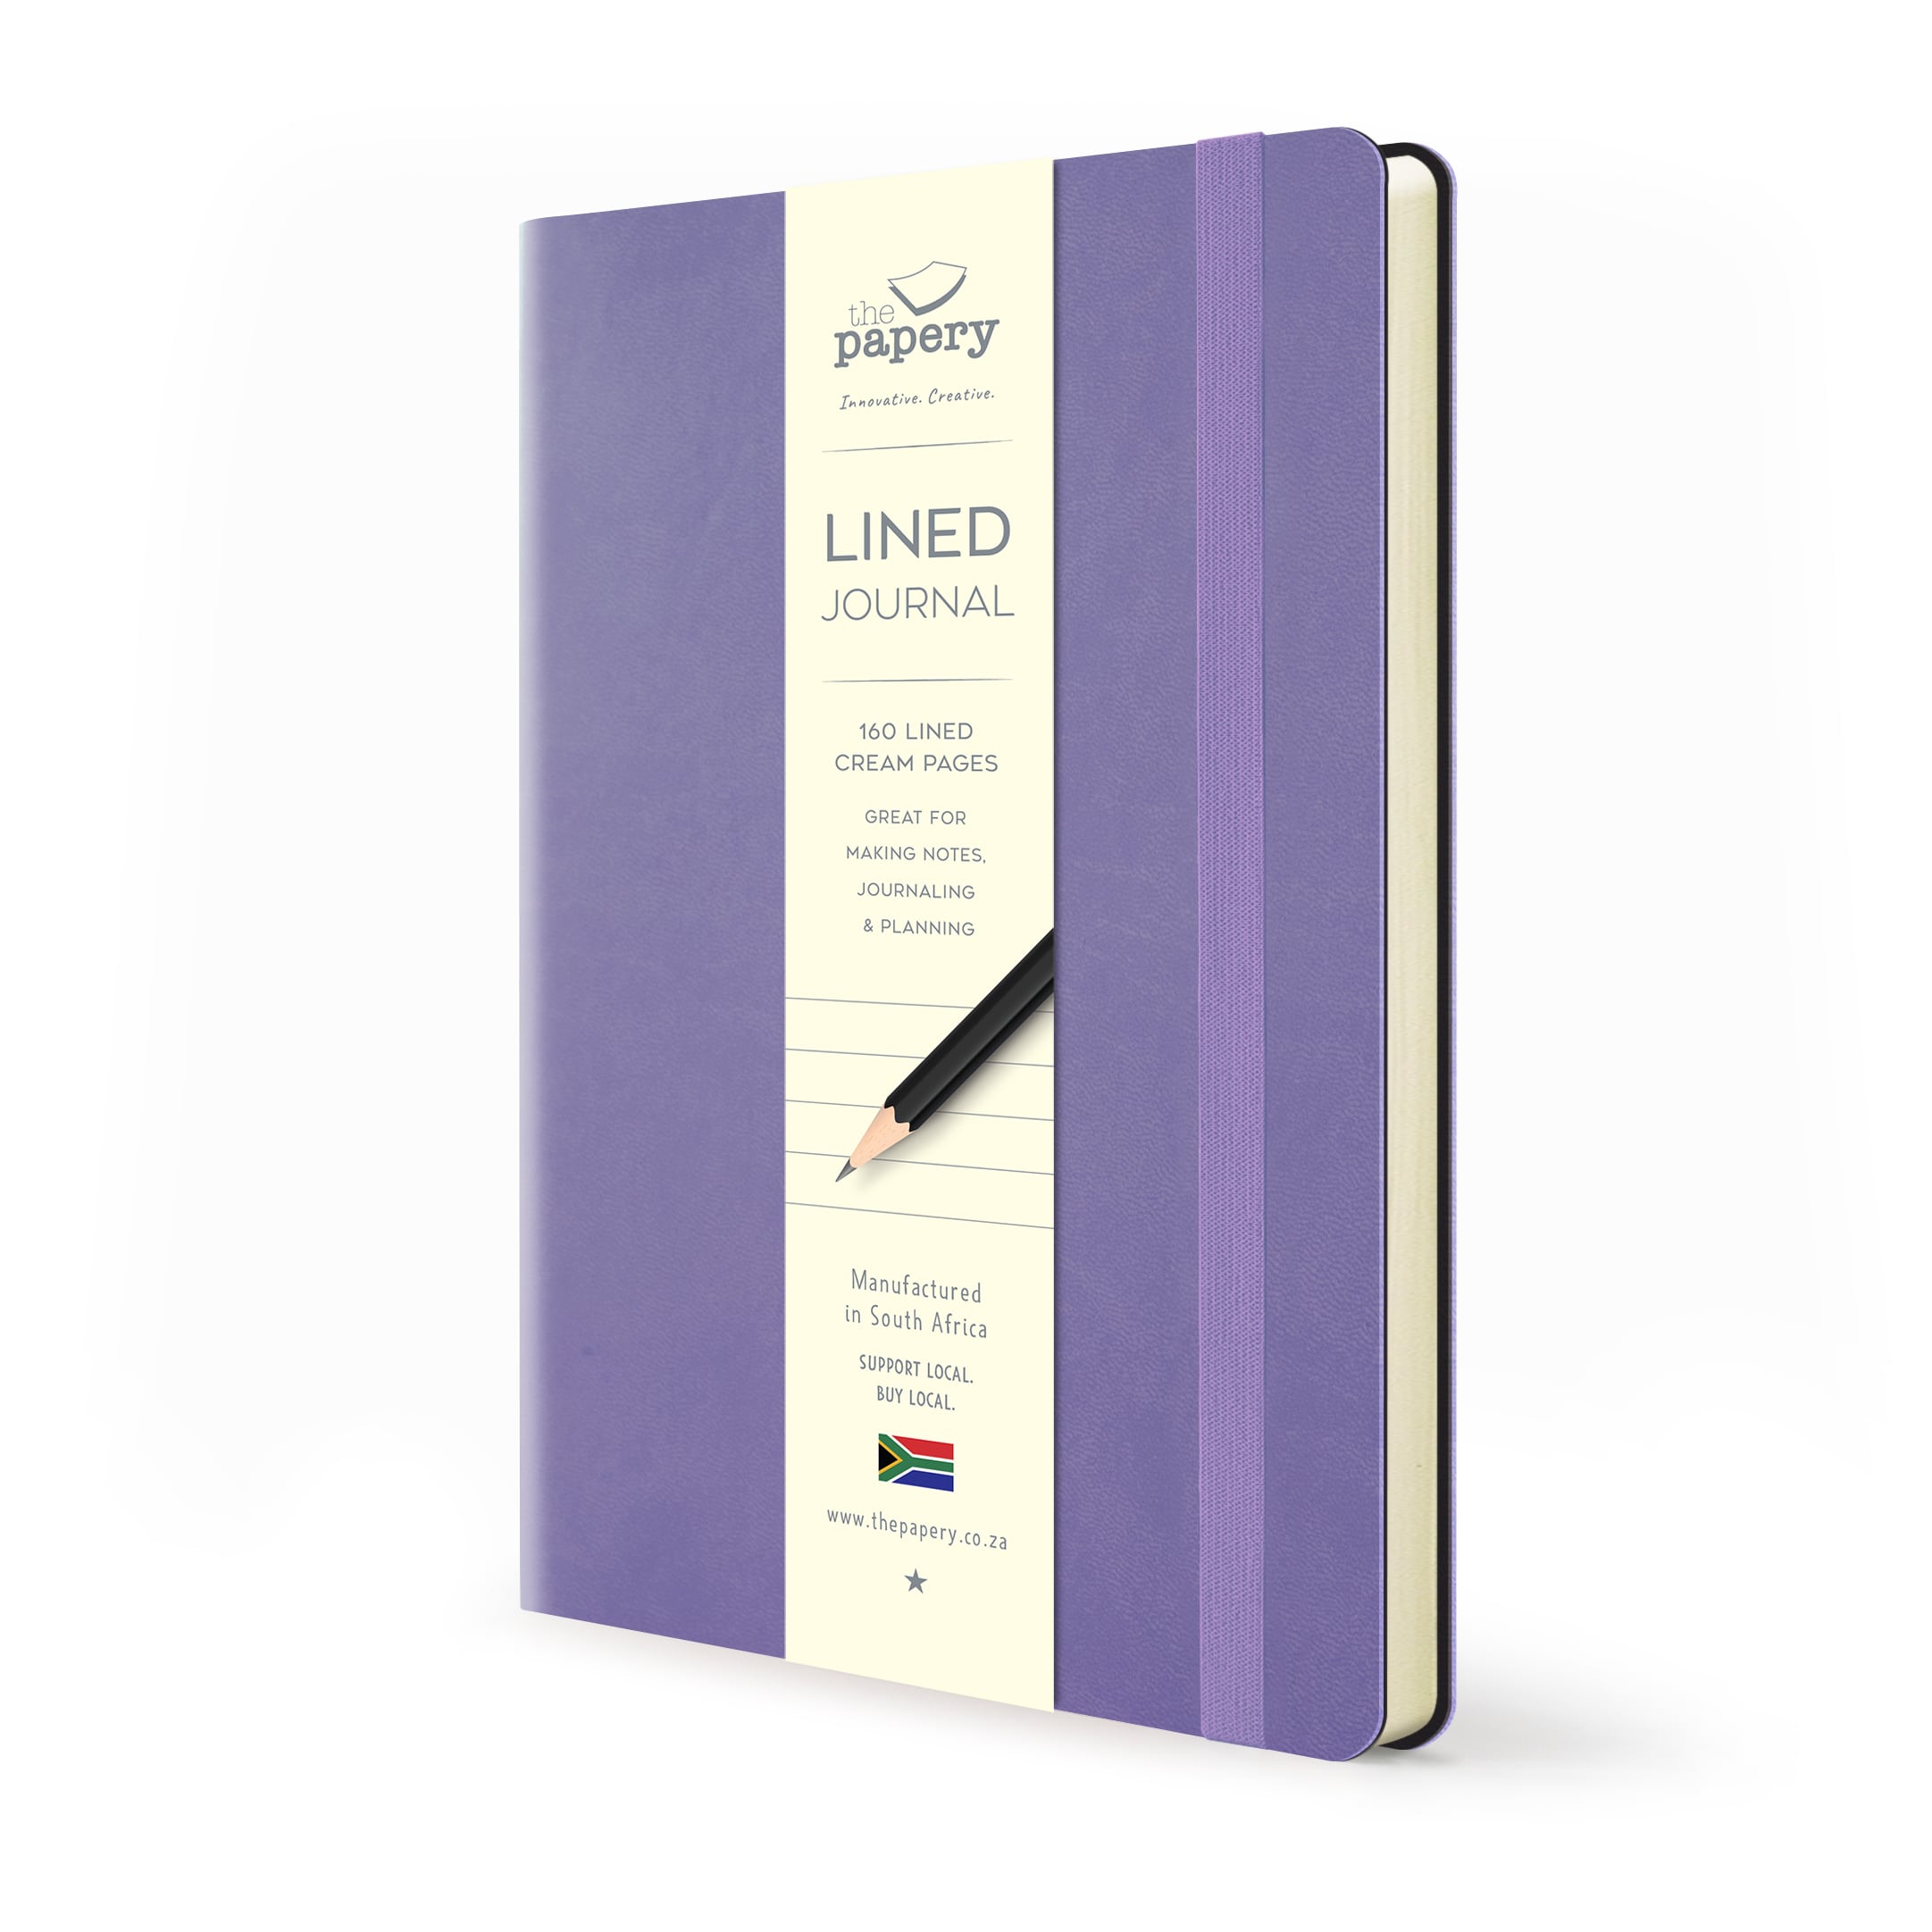 Image shows a lined lavender Flexi journal